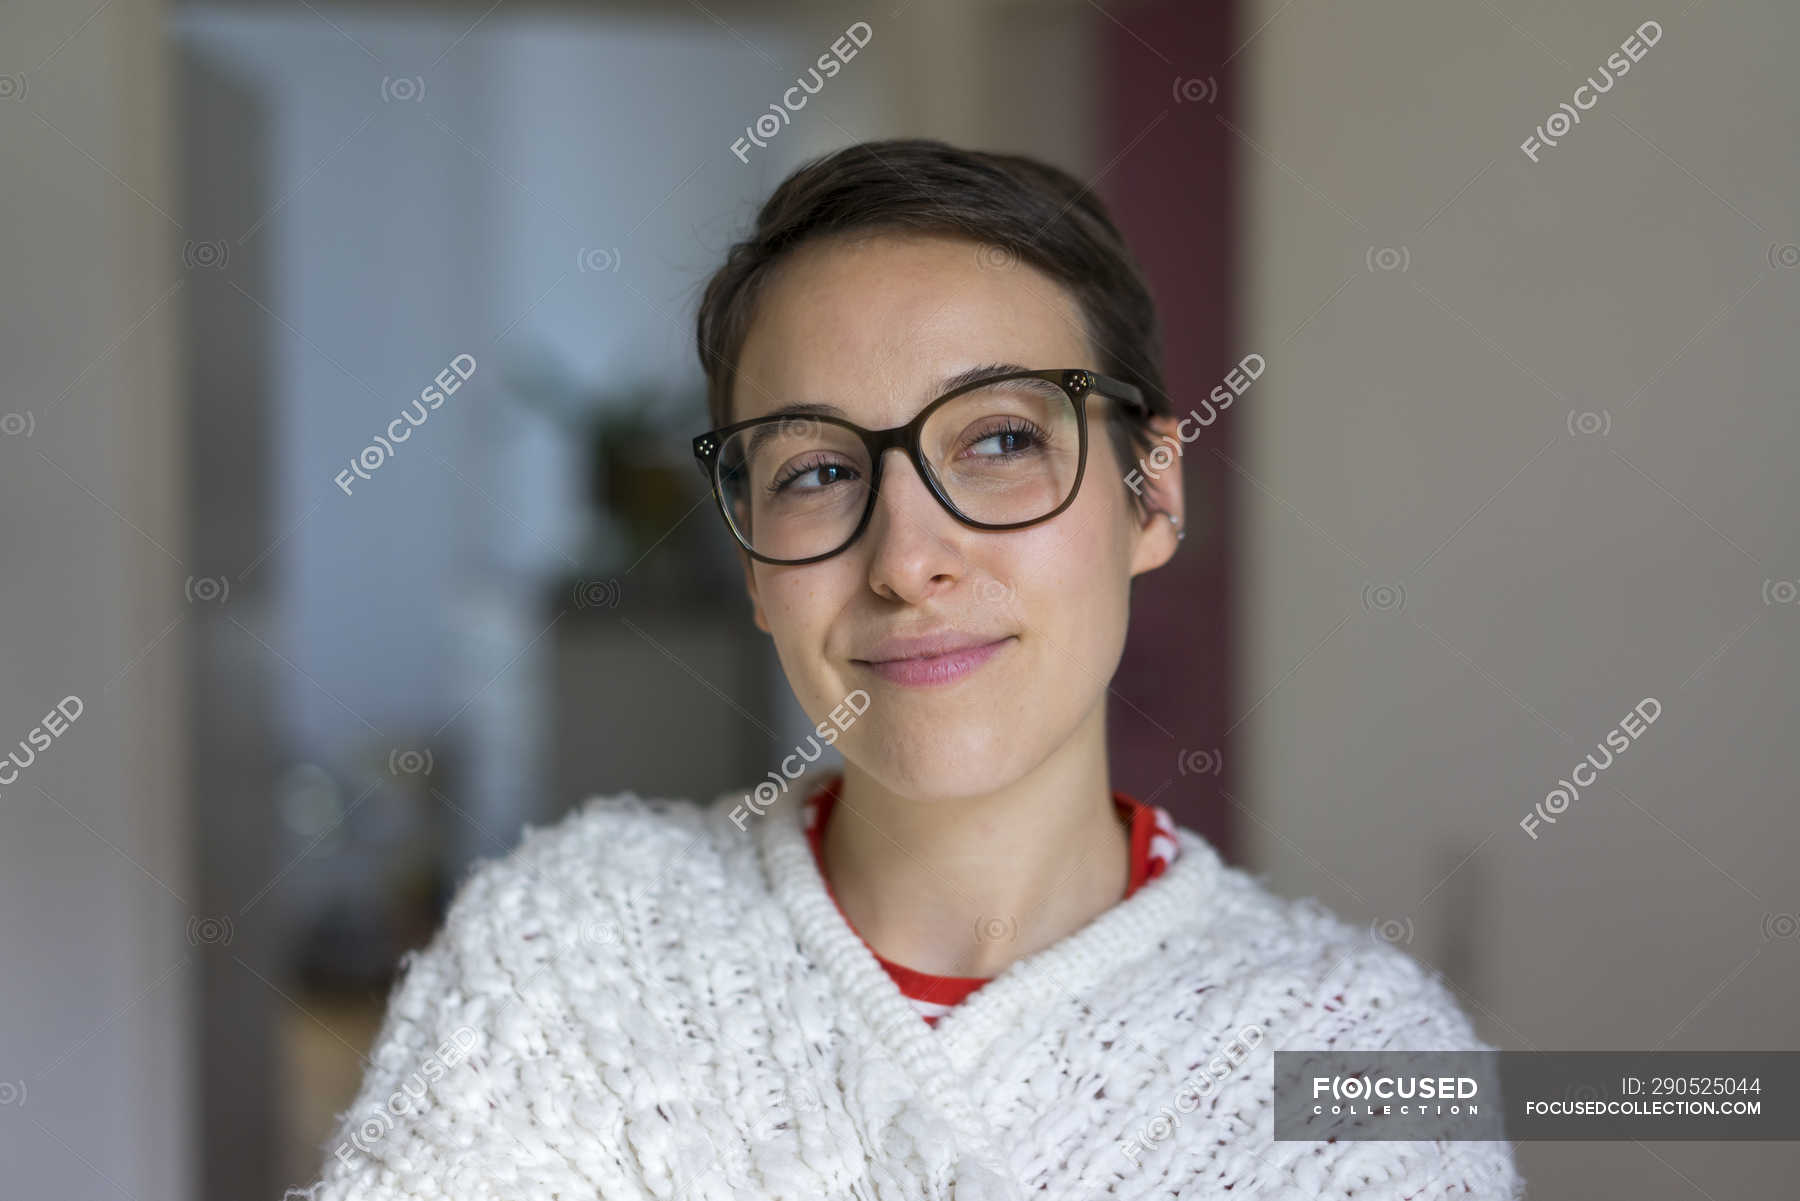 Portrait of a smiling young woman with short hair, wearing glasses —  positive, head and shoulders - Stock Photo | #290525044